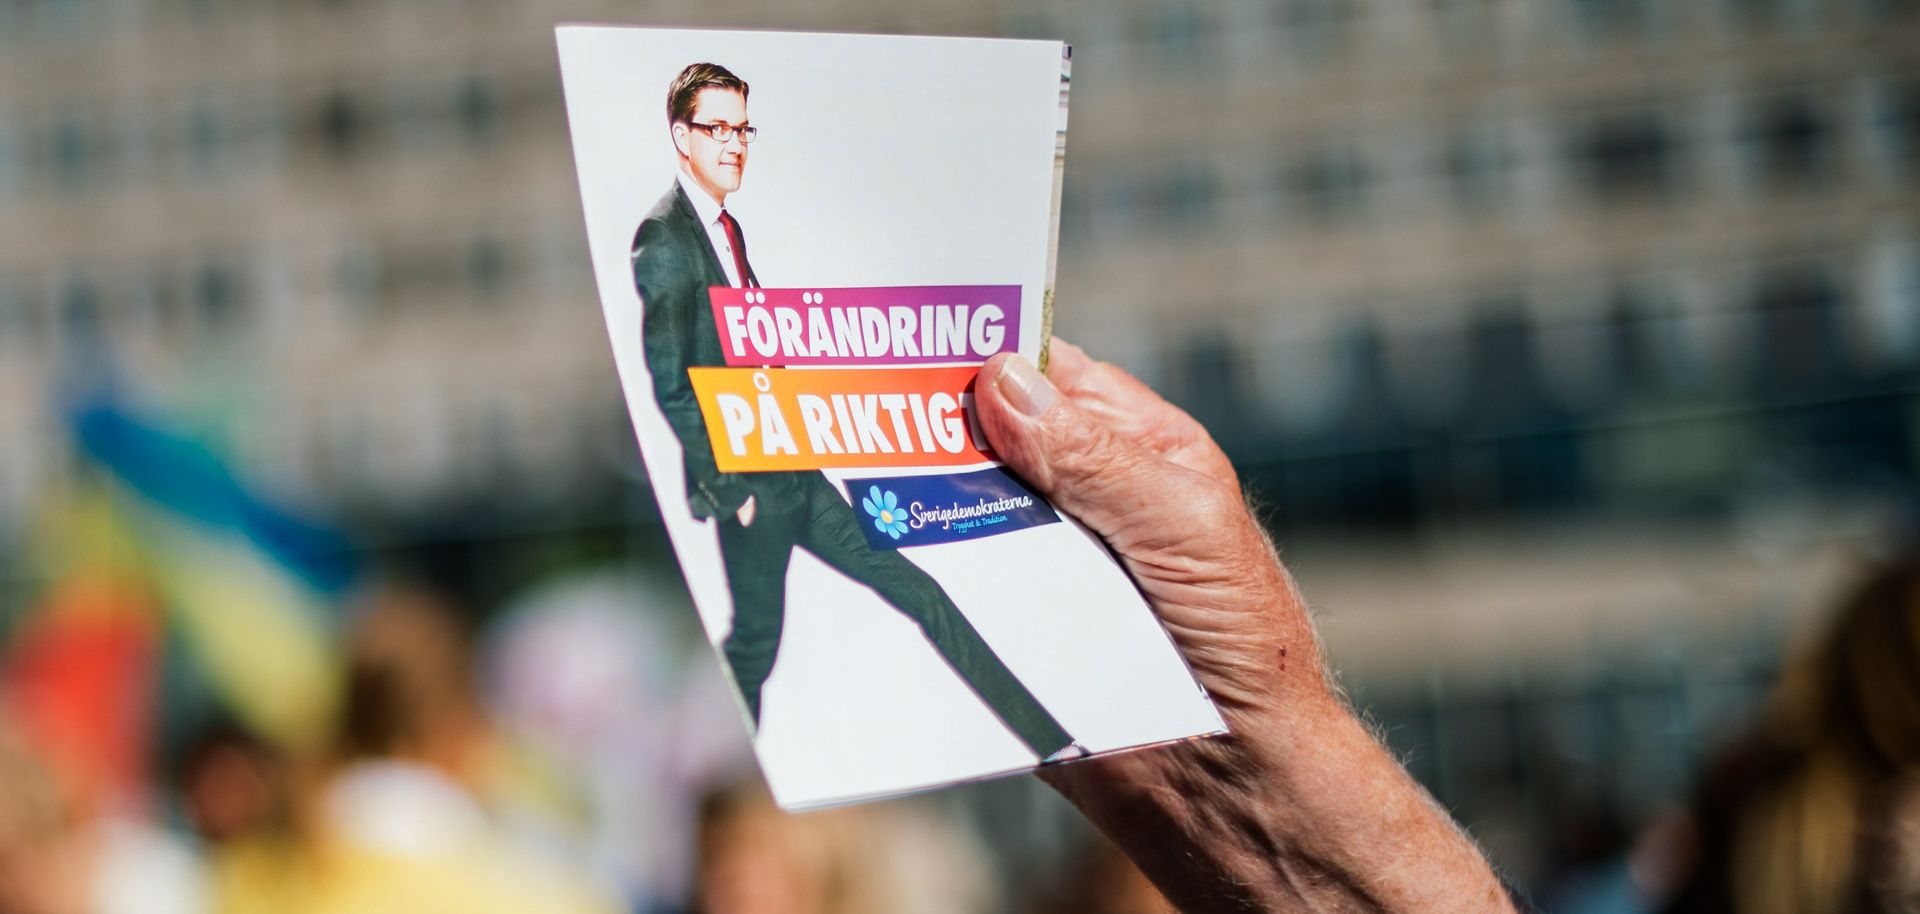 A volunteer hands out leaflets supporting Swedish Democrats leader Jimmie Akesson on Sept. 10, 2014, in Stockholm.